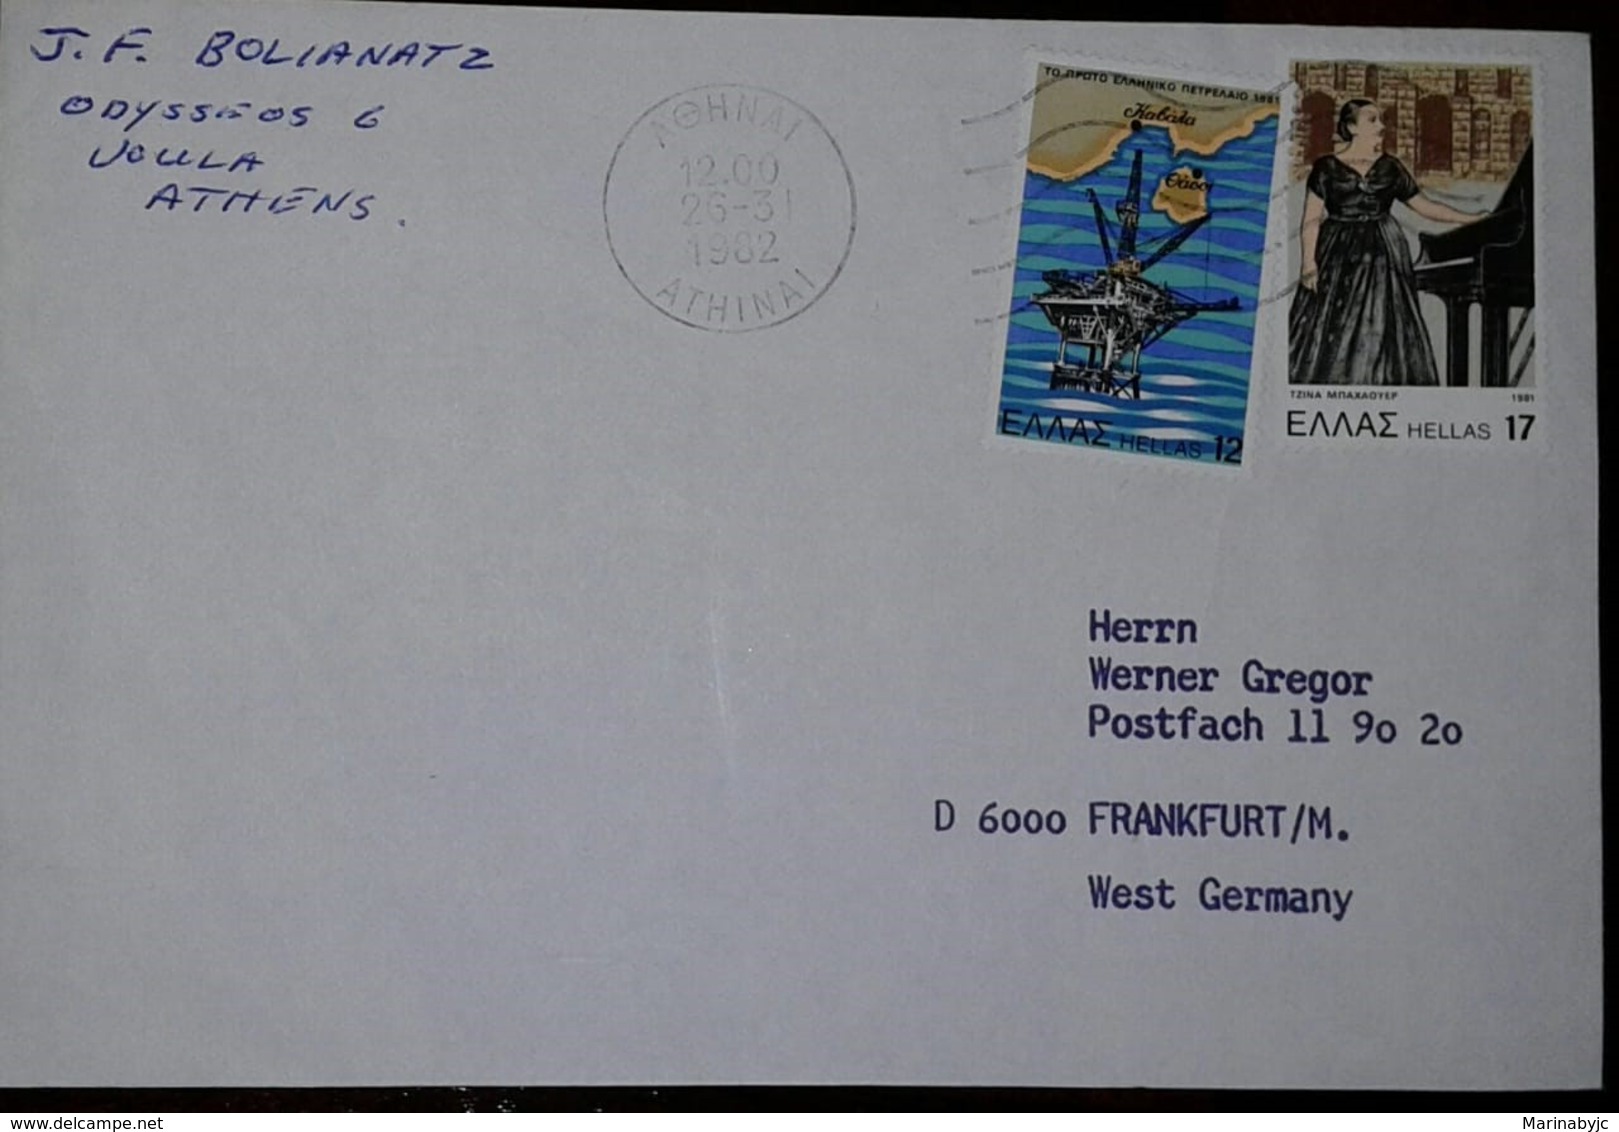 L) 1982 GREECE, OIL RIG, GINA BACHAUER, PIANIST, MUSIC, CIRCULATED COVER FROM GREECE TO WEST GERMANY - Covers & Documents